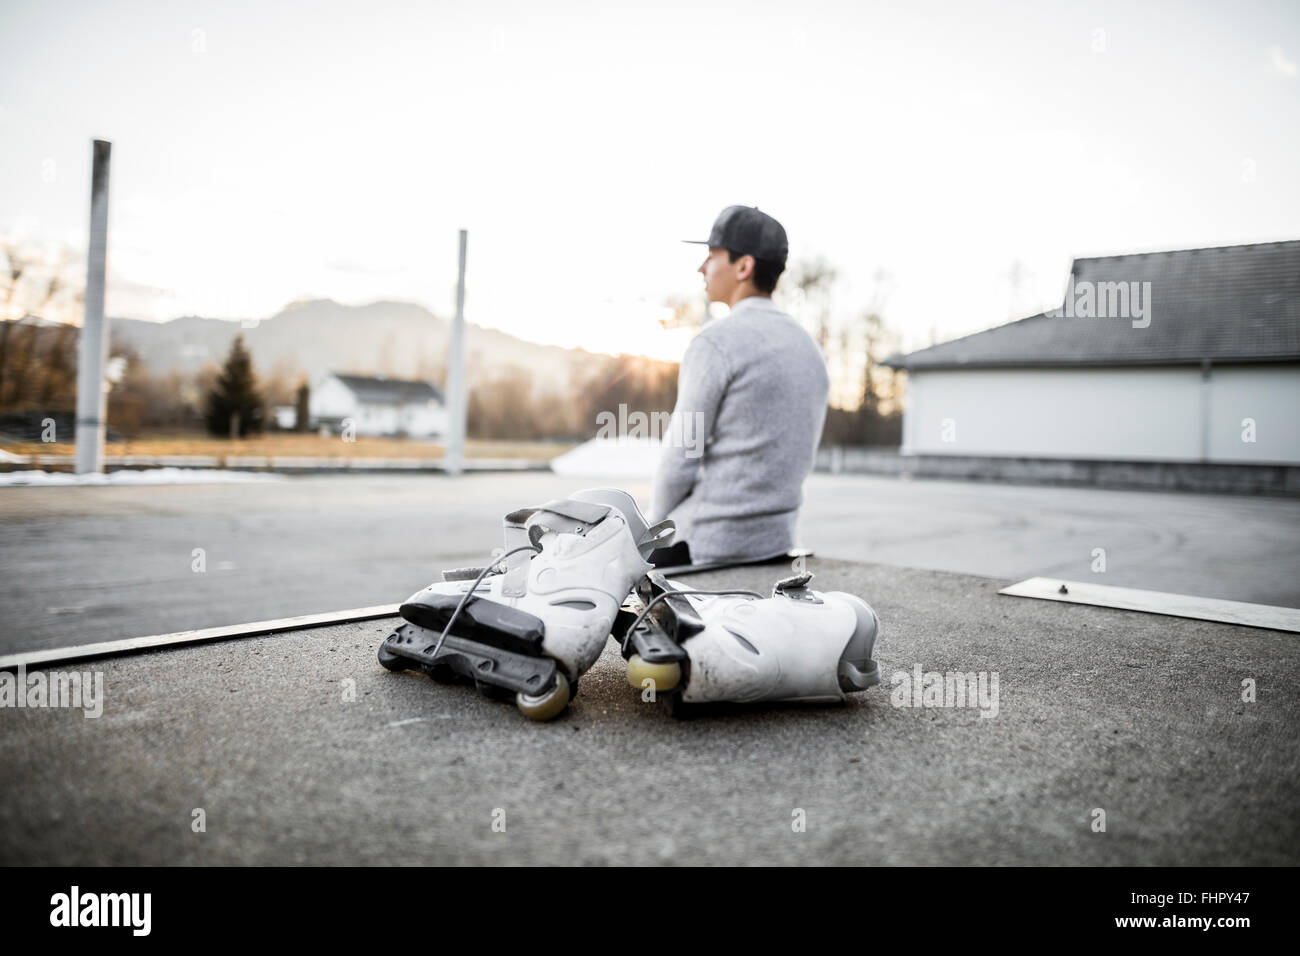 Young man sitting on ramp with inline skates Stock Photo